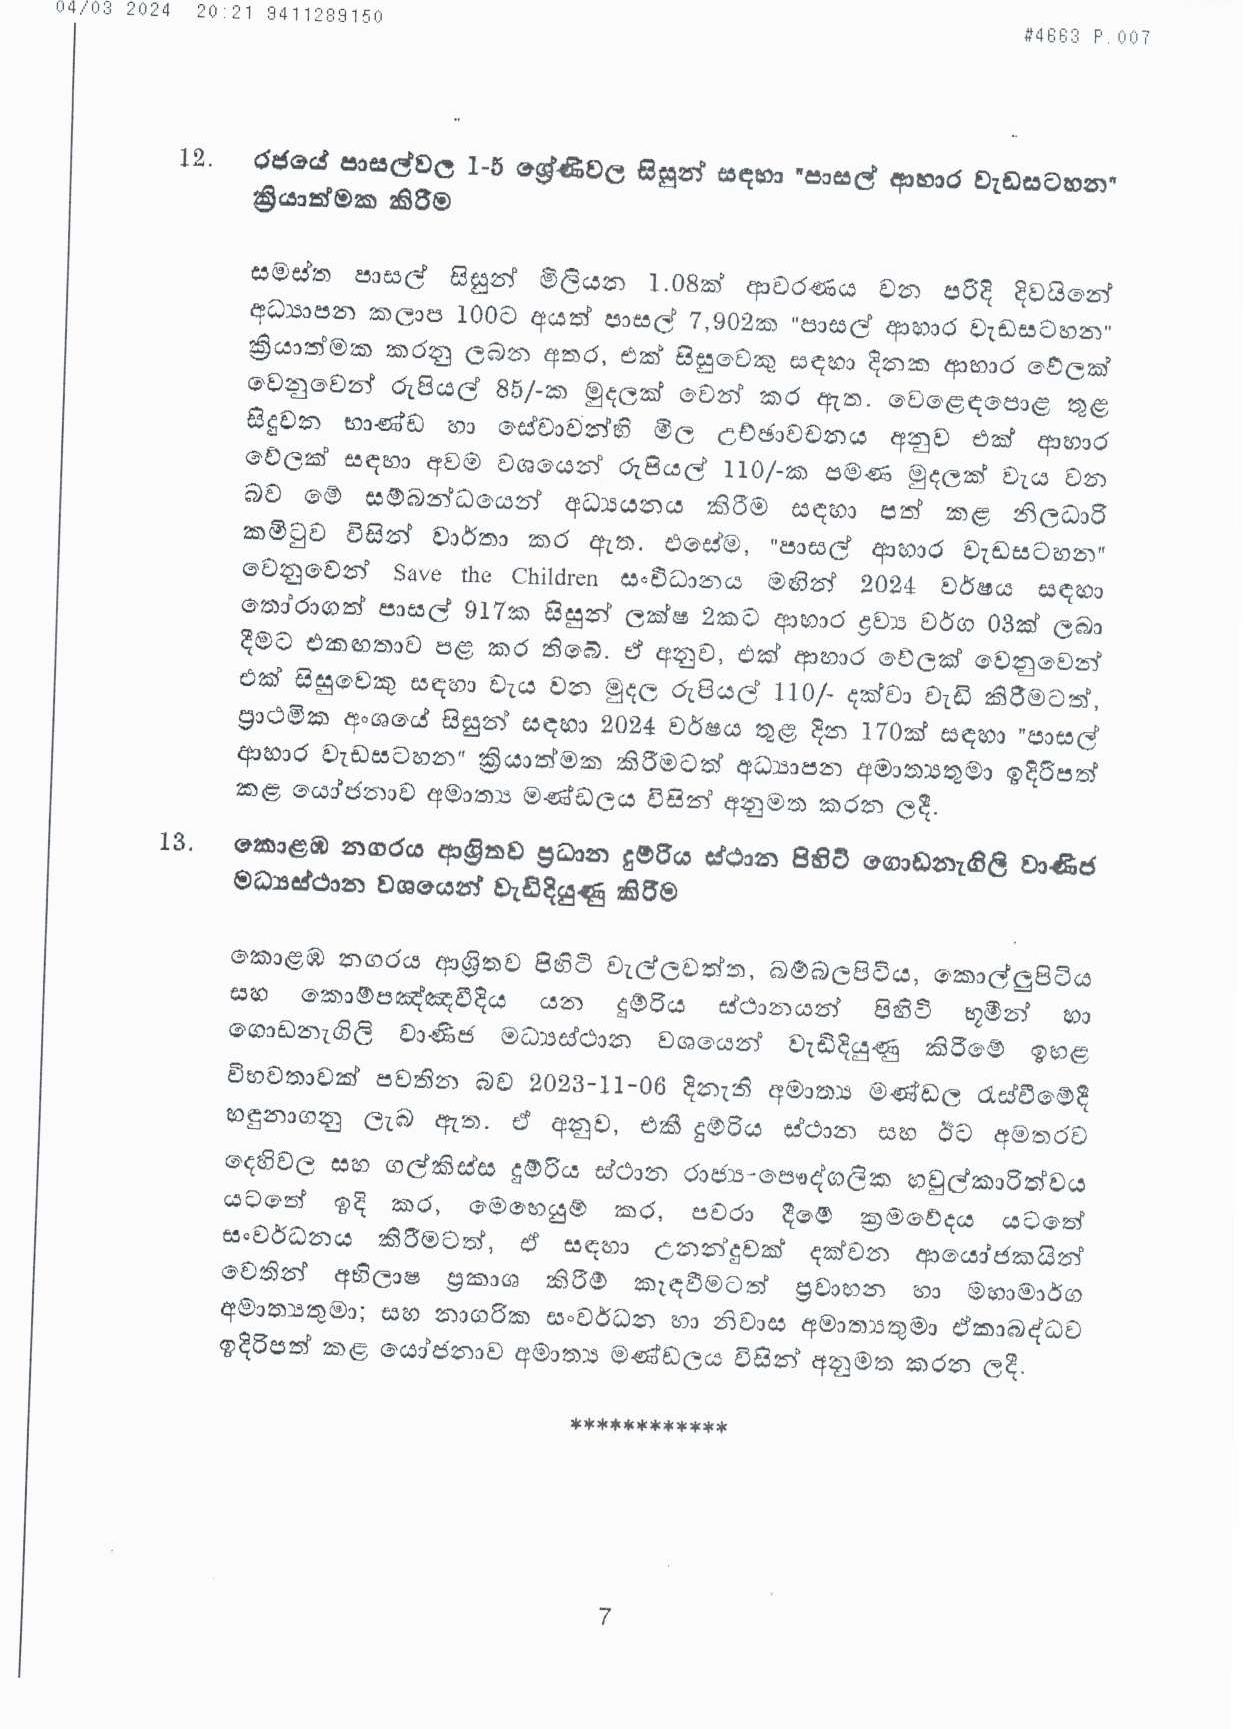 Cabinet Decision on 04.03.2024 page 007